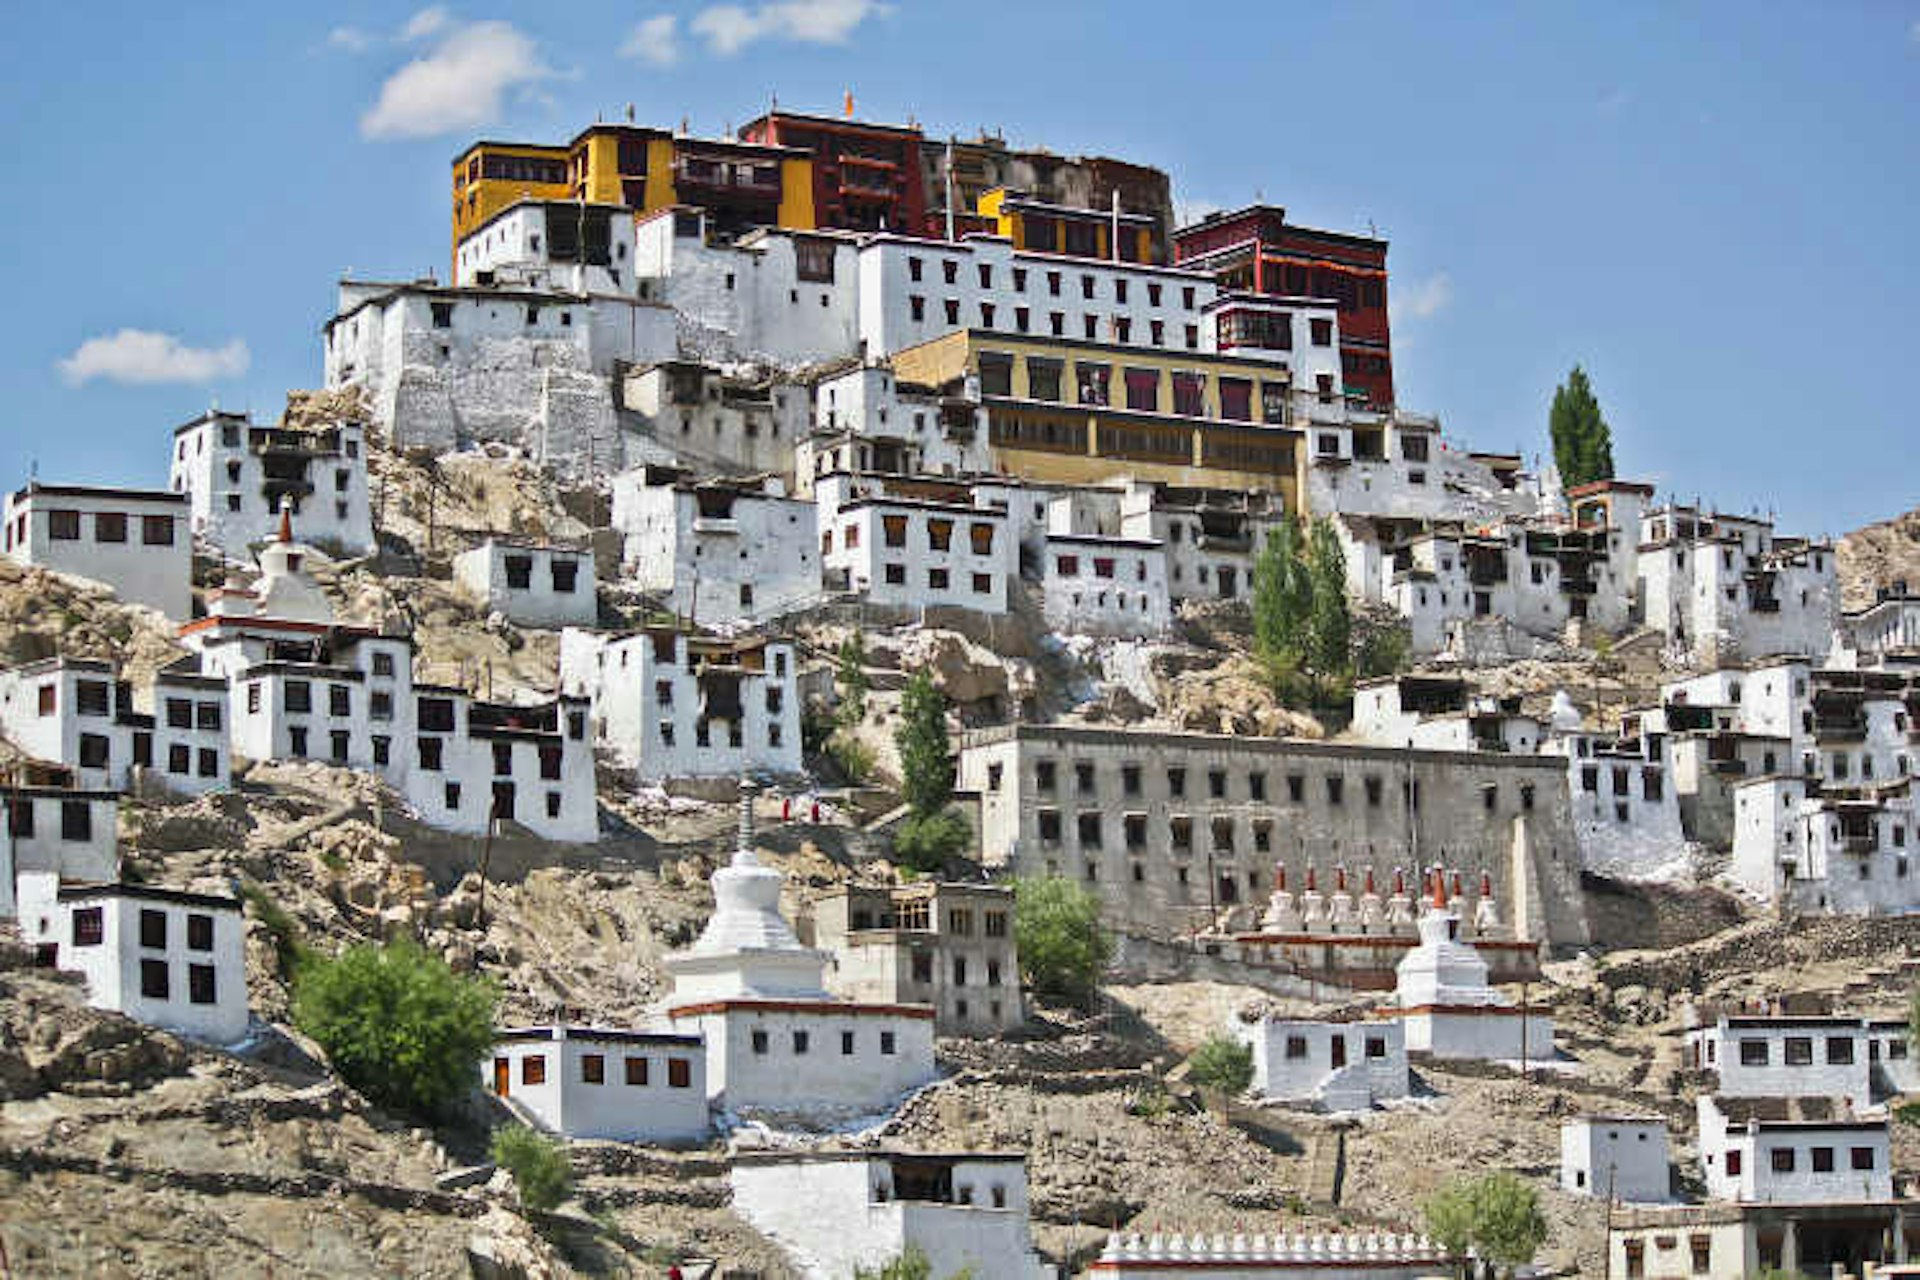 Whitewashed monastic buildings at Thiksey Gompa, Ladakh. Image by Saad Faruque / CC BY 2.0.